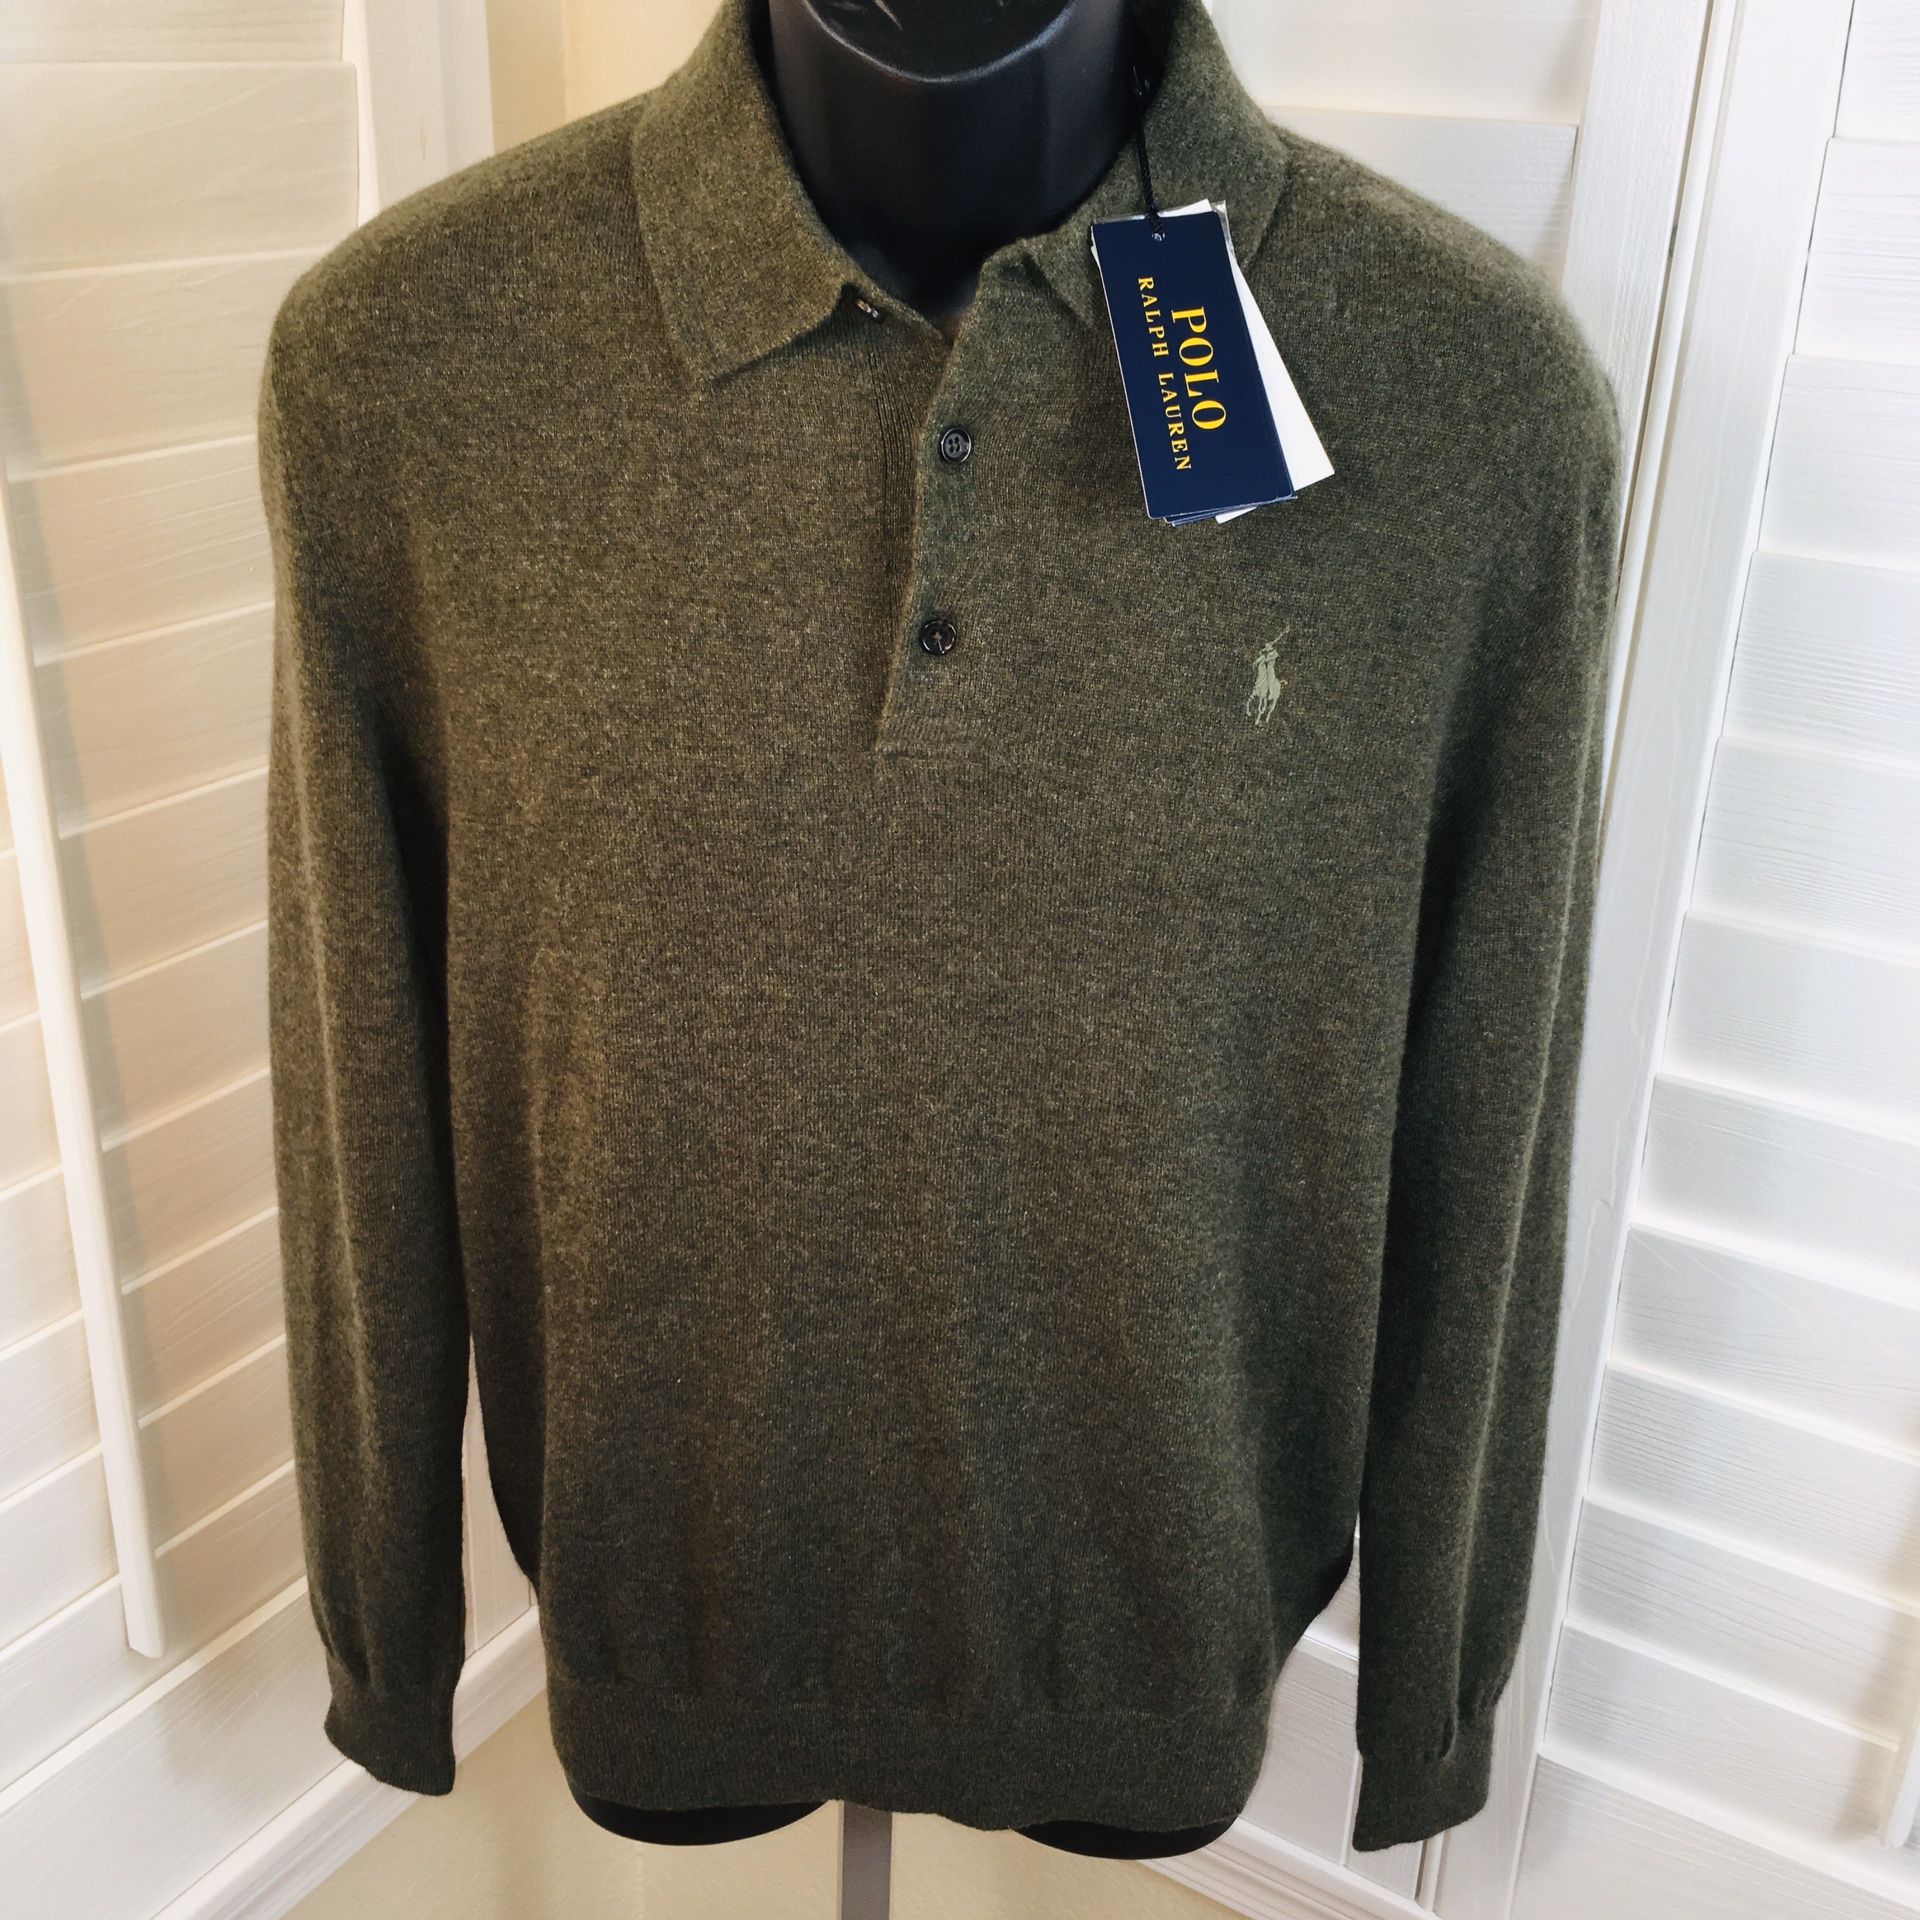 Polo Ralph Lauren Machine Washable Cashmere Sweater, Olive - Men’s M - Brand New w/Tags $298